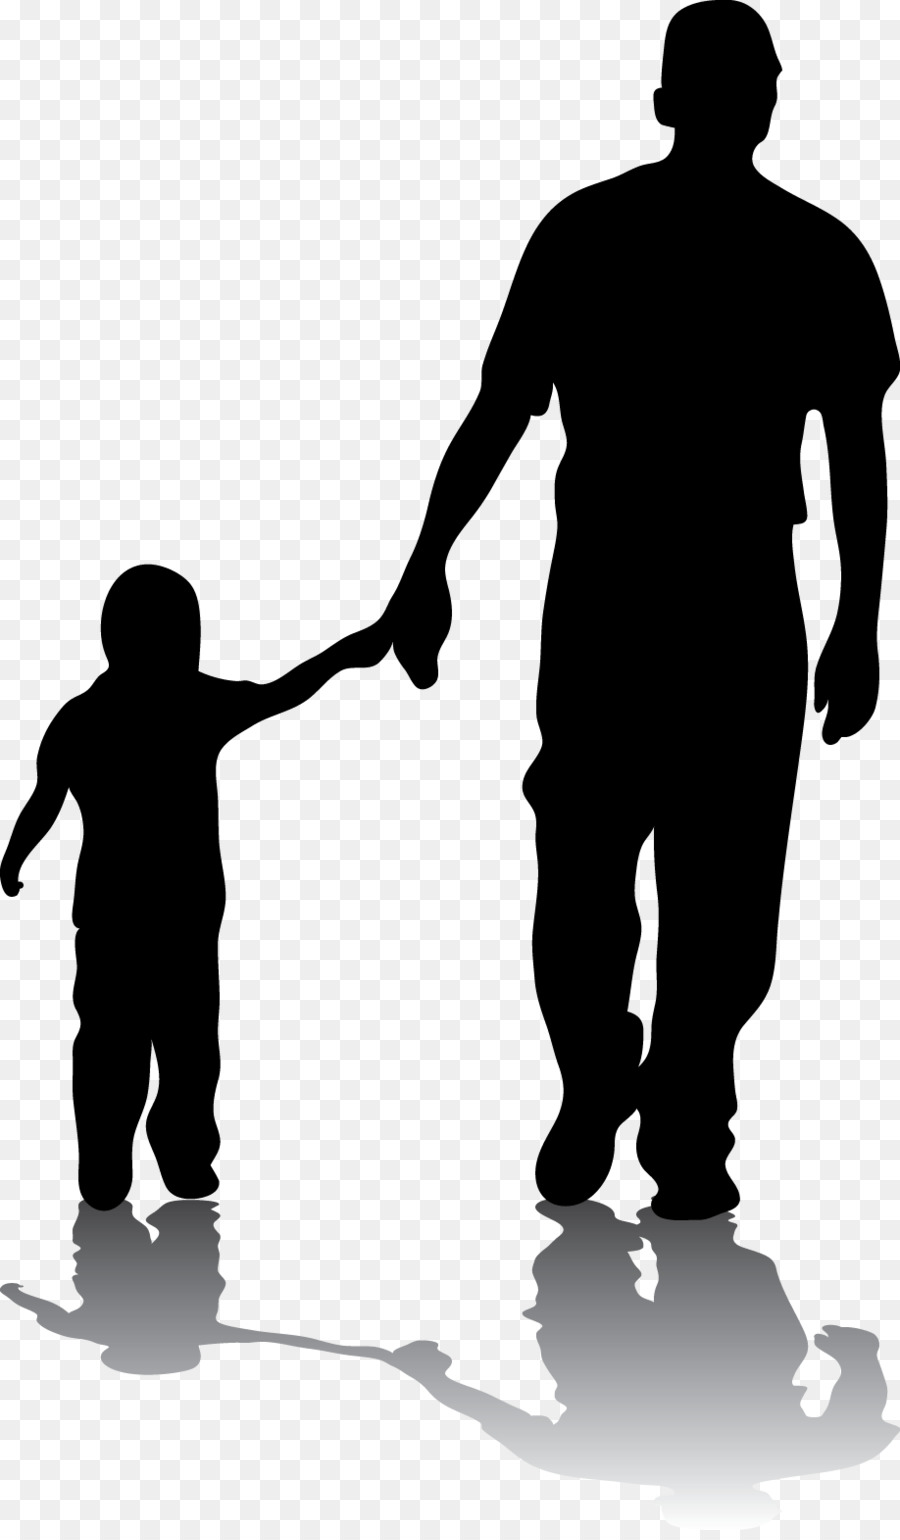 Father Silhouette Son Daughter Family - father png download - 918*1561 - Free Transparent Father png Download.